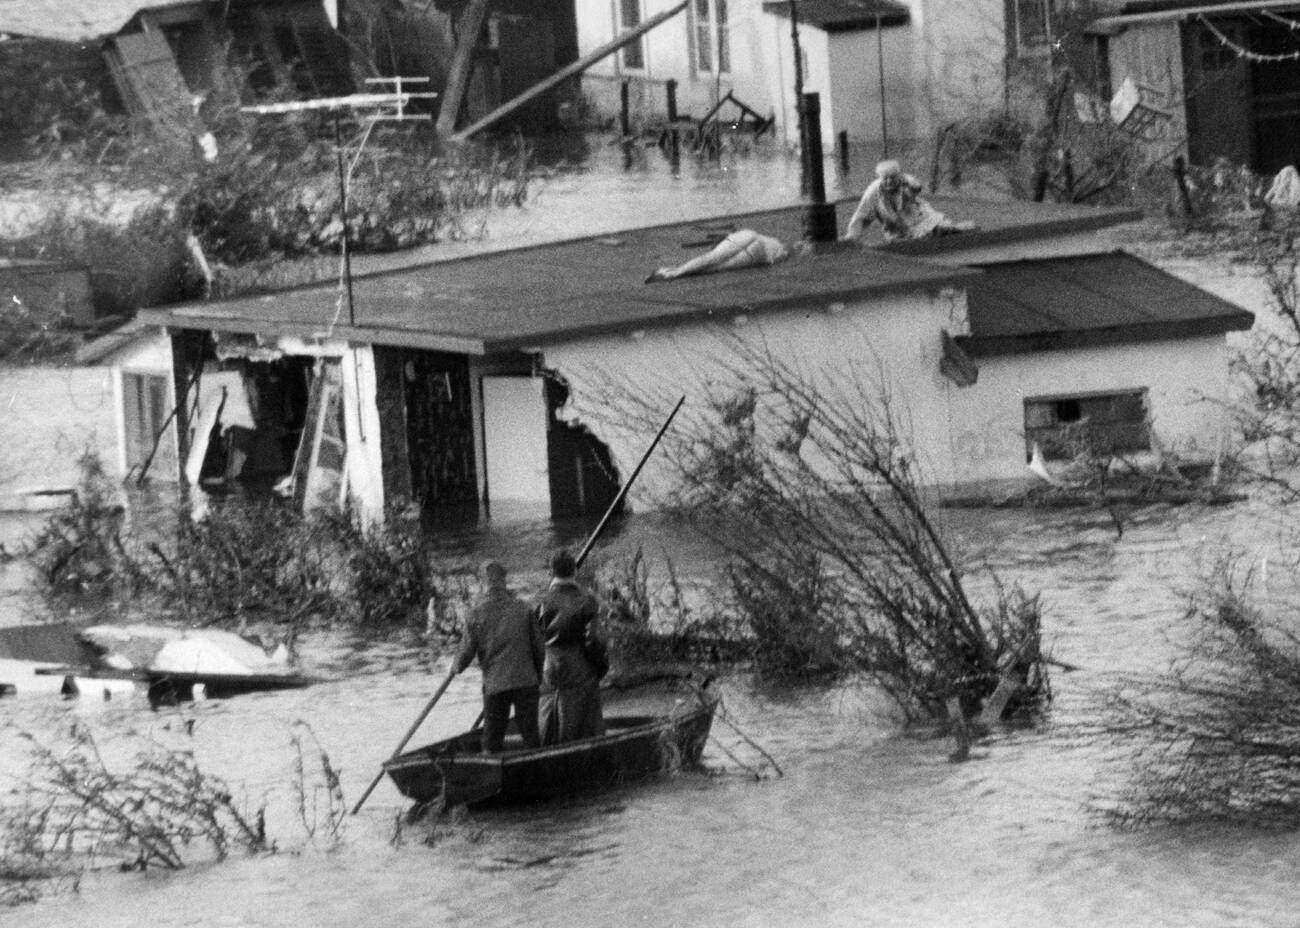 Man carrying the corpse of his wife on a roof after the North Sea flood of 1962 in Hamburg, West Germany, with victims and natural catastrophe in the background.